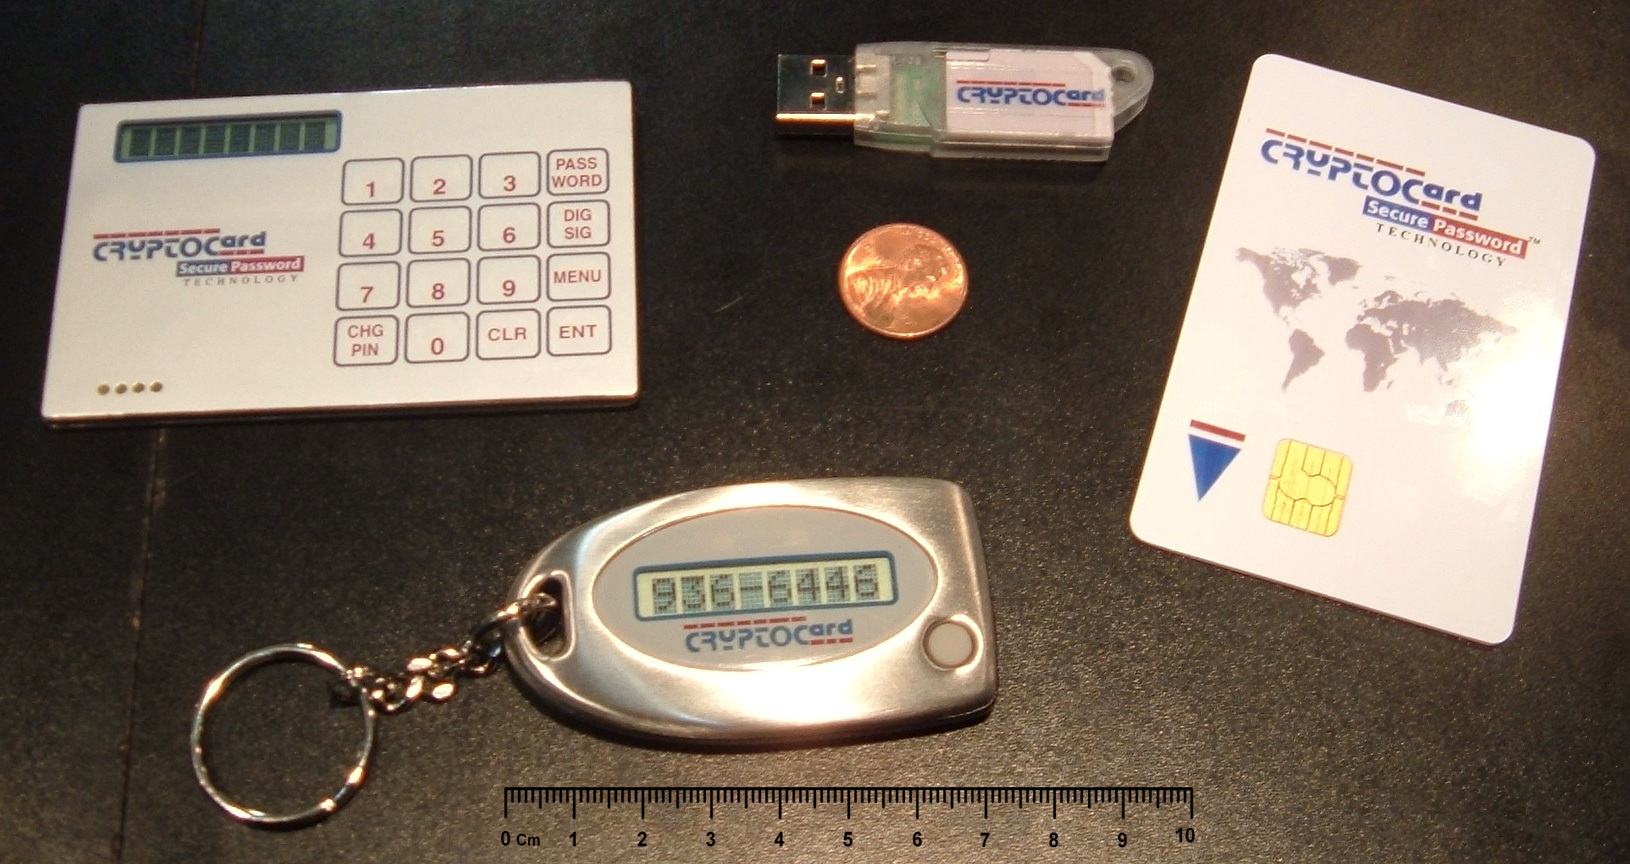 File:SecurityTokens.CryptoCard.agr.jpg - Wikimedia Commons